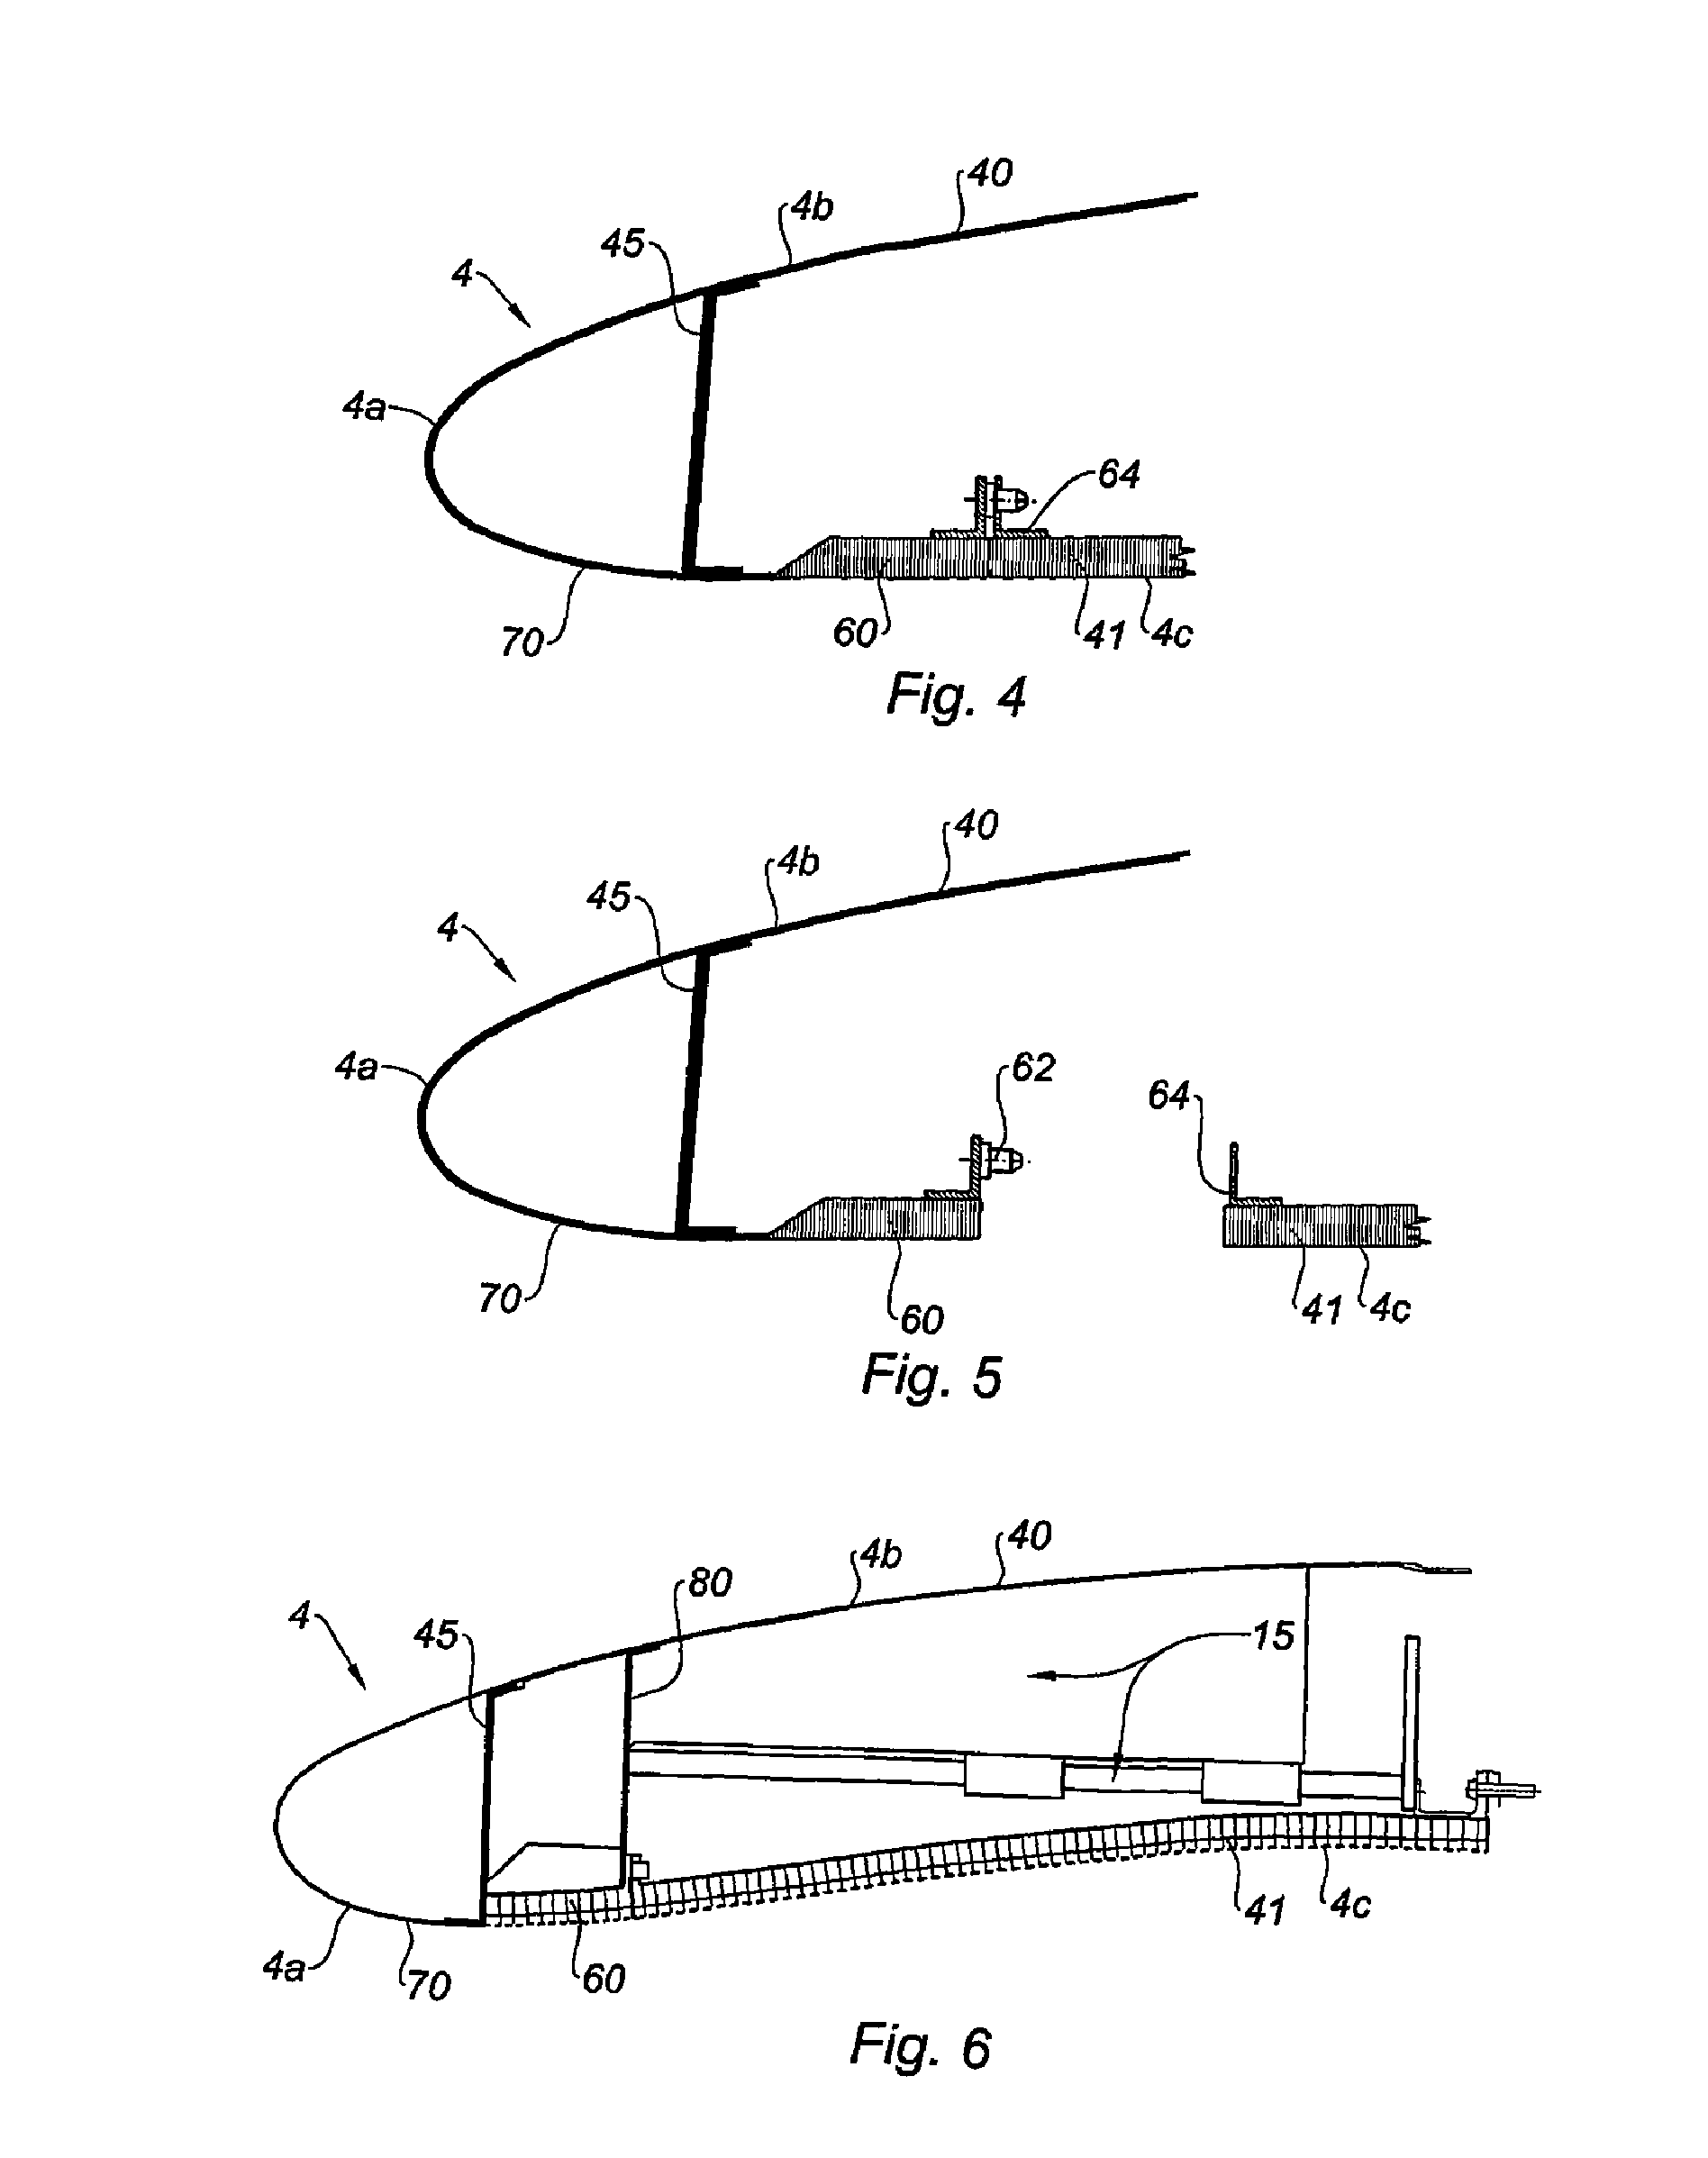 Air intake structure for a turbine engine nacelle